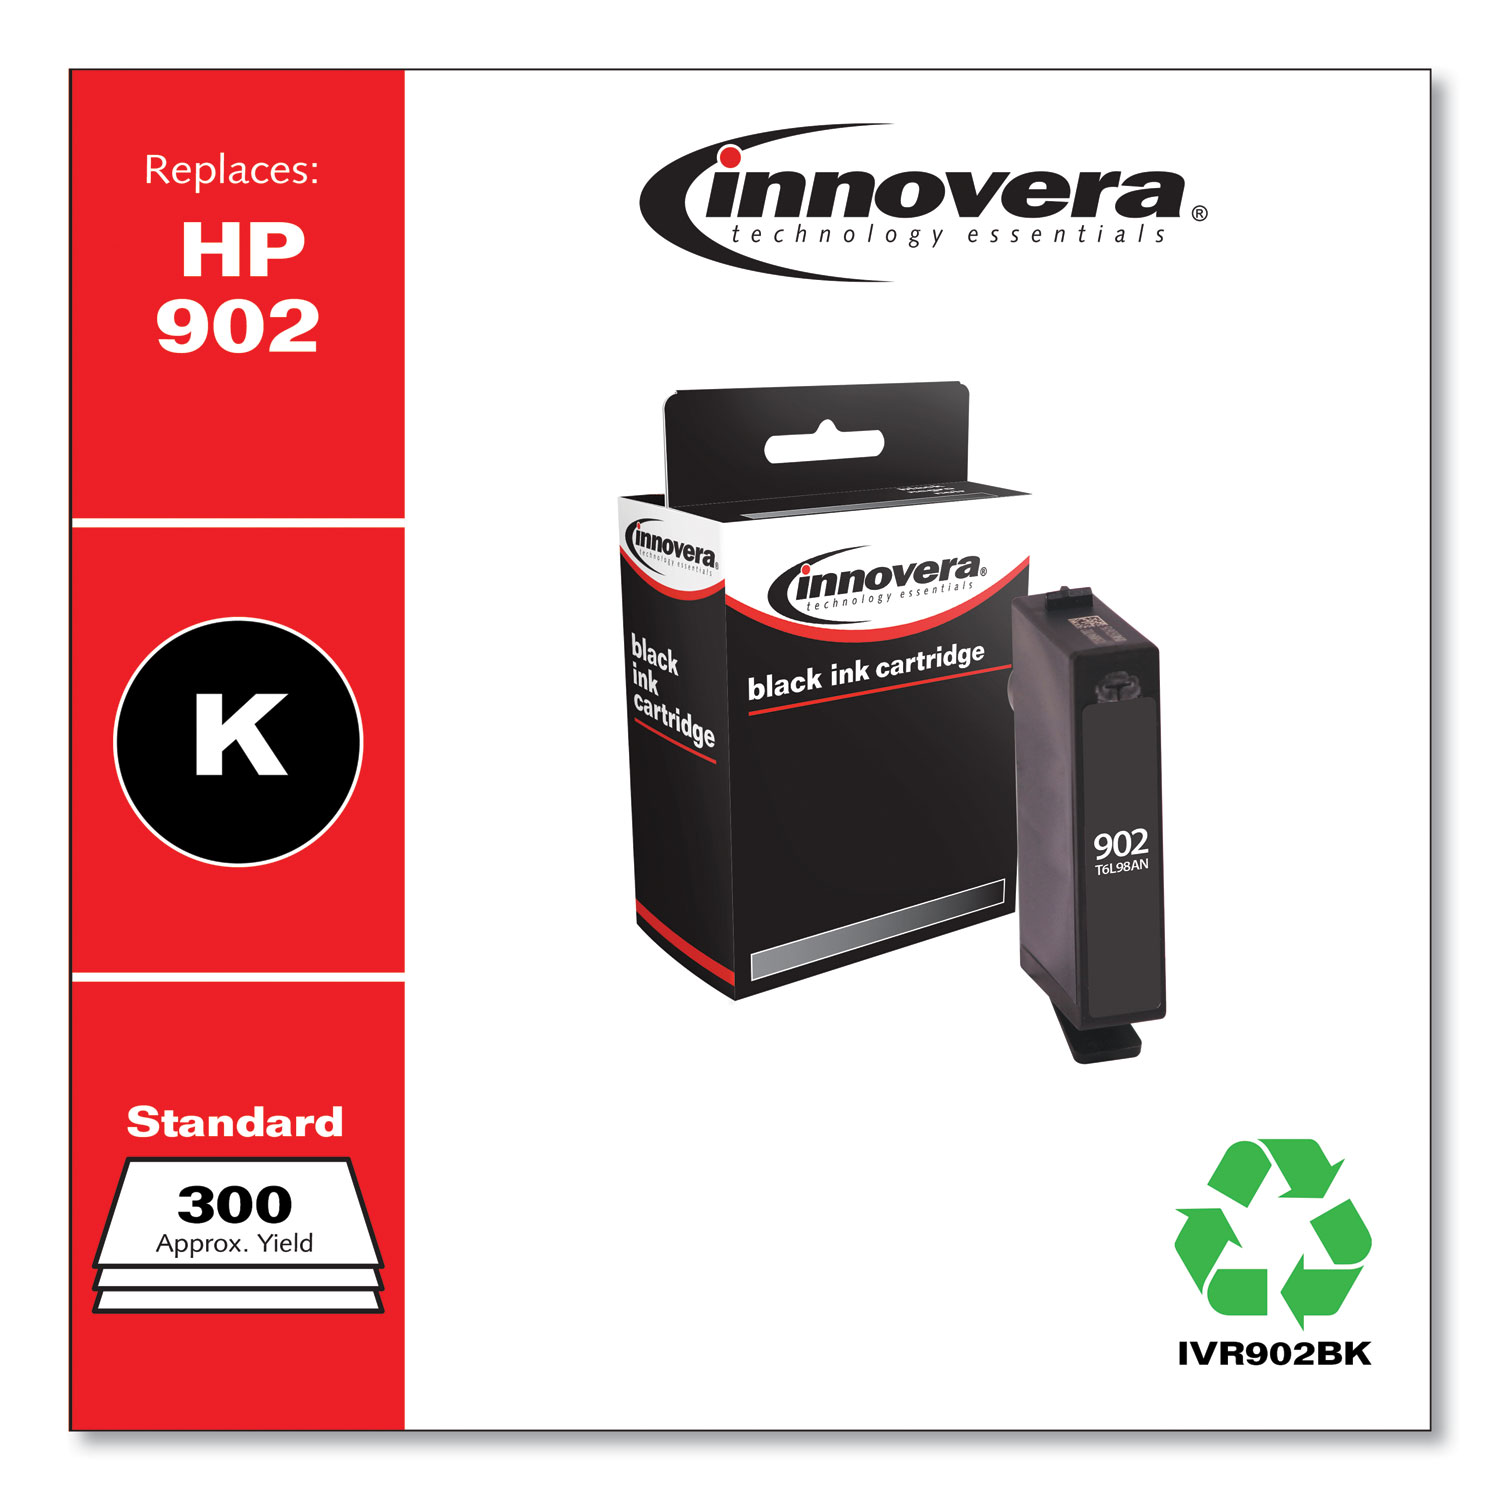  Innovera IVR902BK Remanufactured Black Ink, Replacement for HP 902 (T6L98AN), 300 Page-Yield (IVR902BK) 